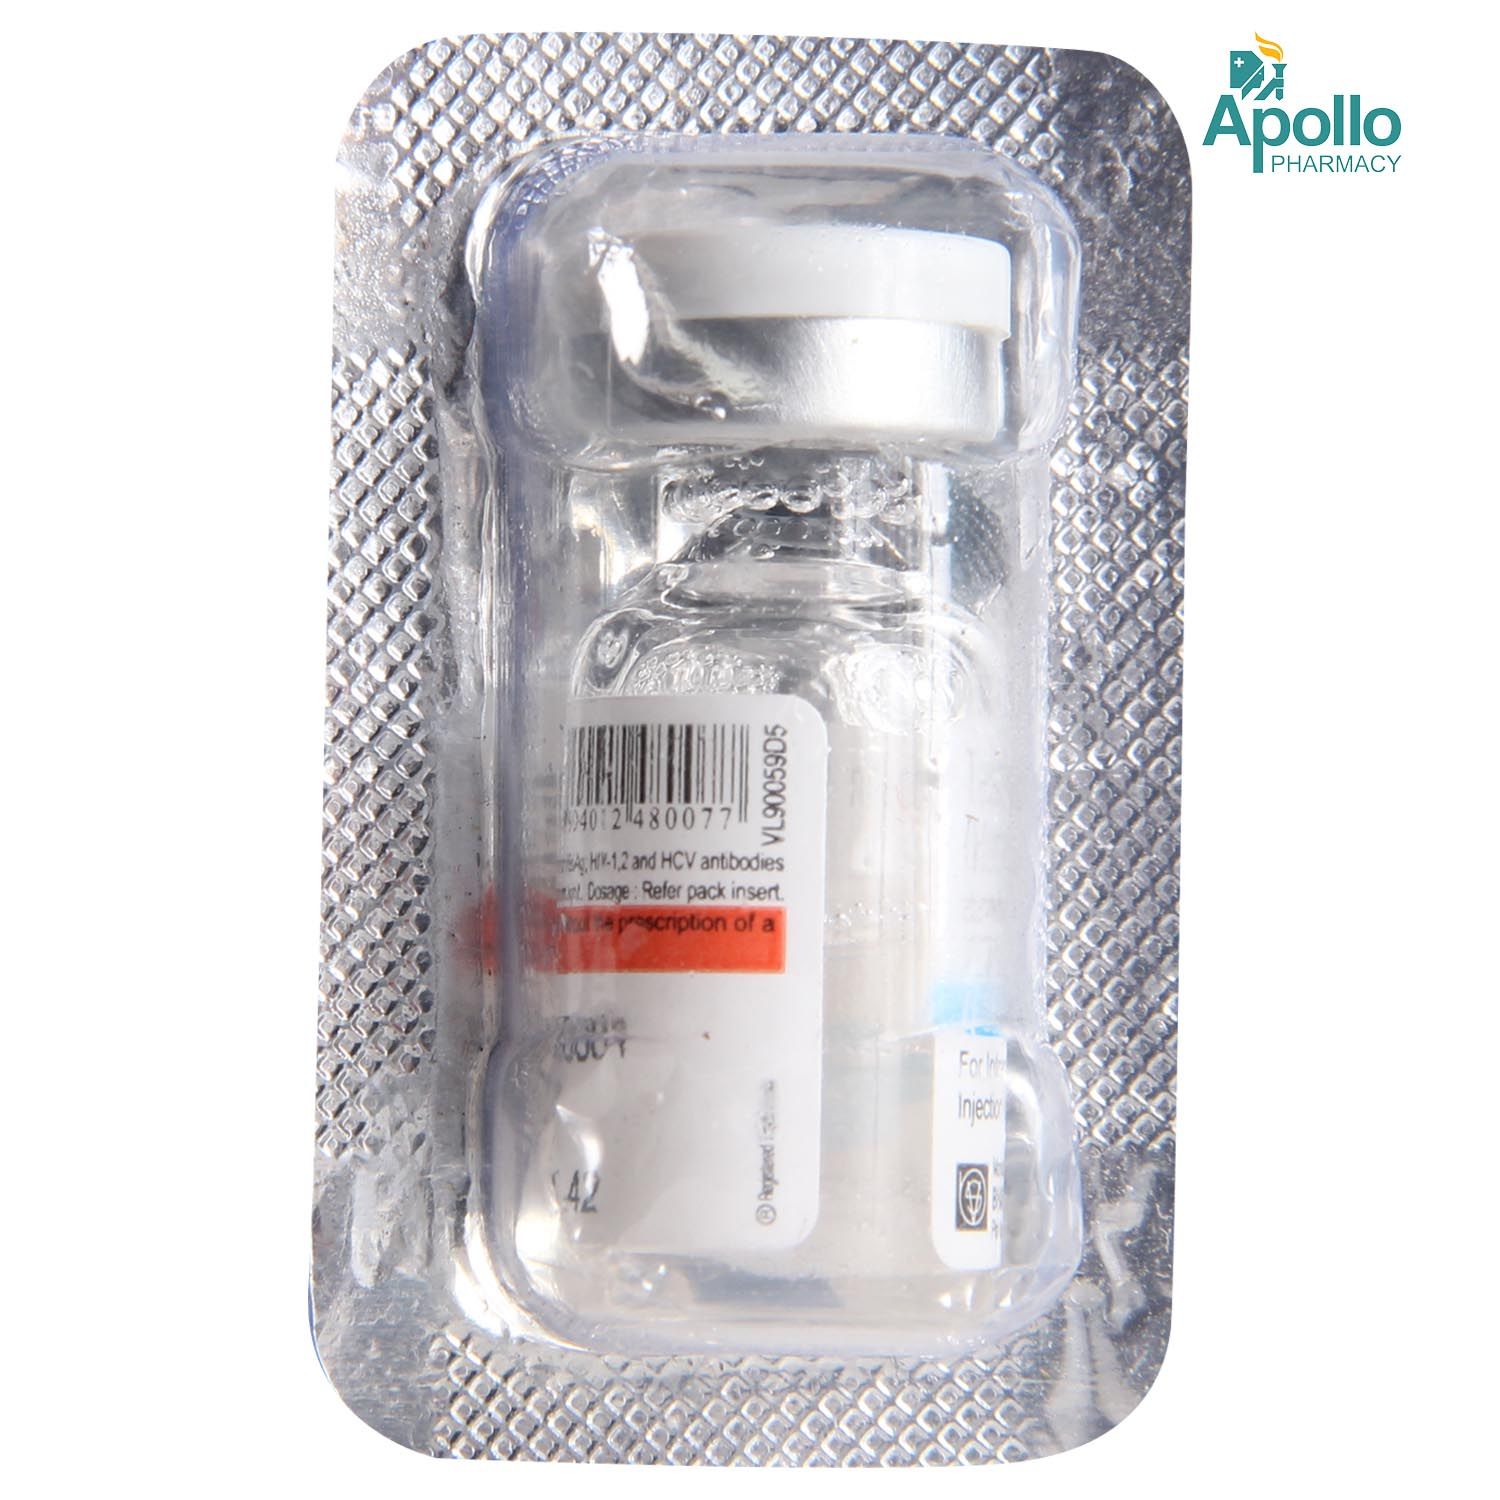 TETGLOB 500IU INJECTION, Pack of 1 INJECTION